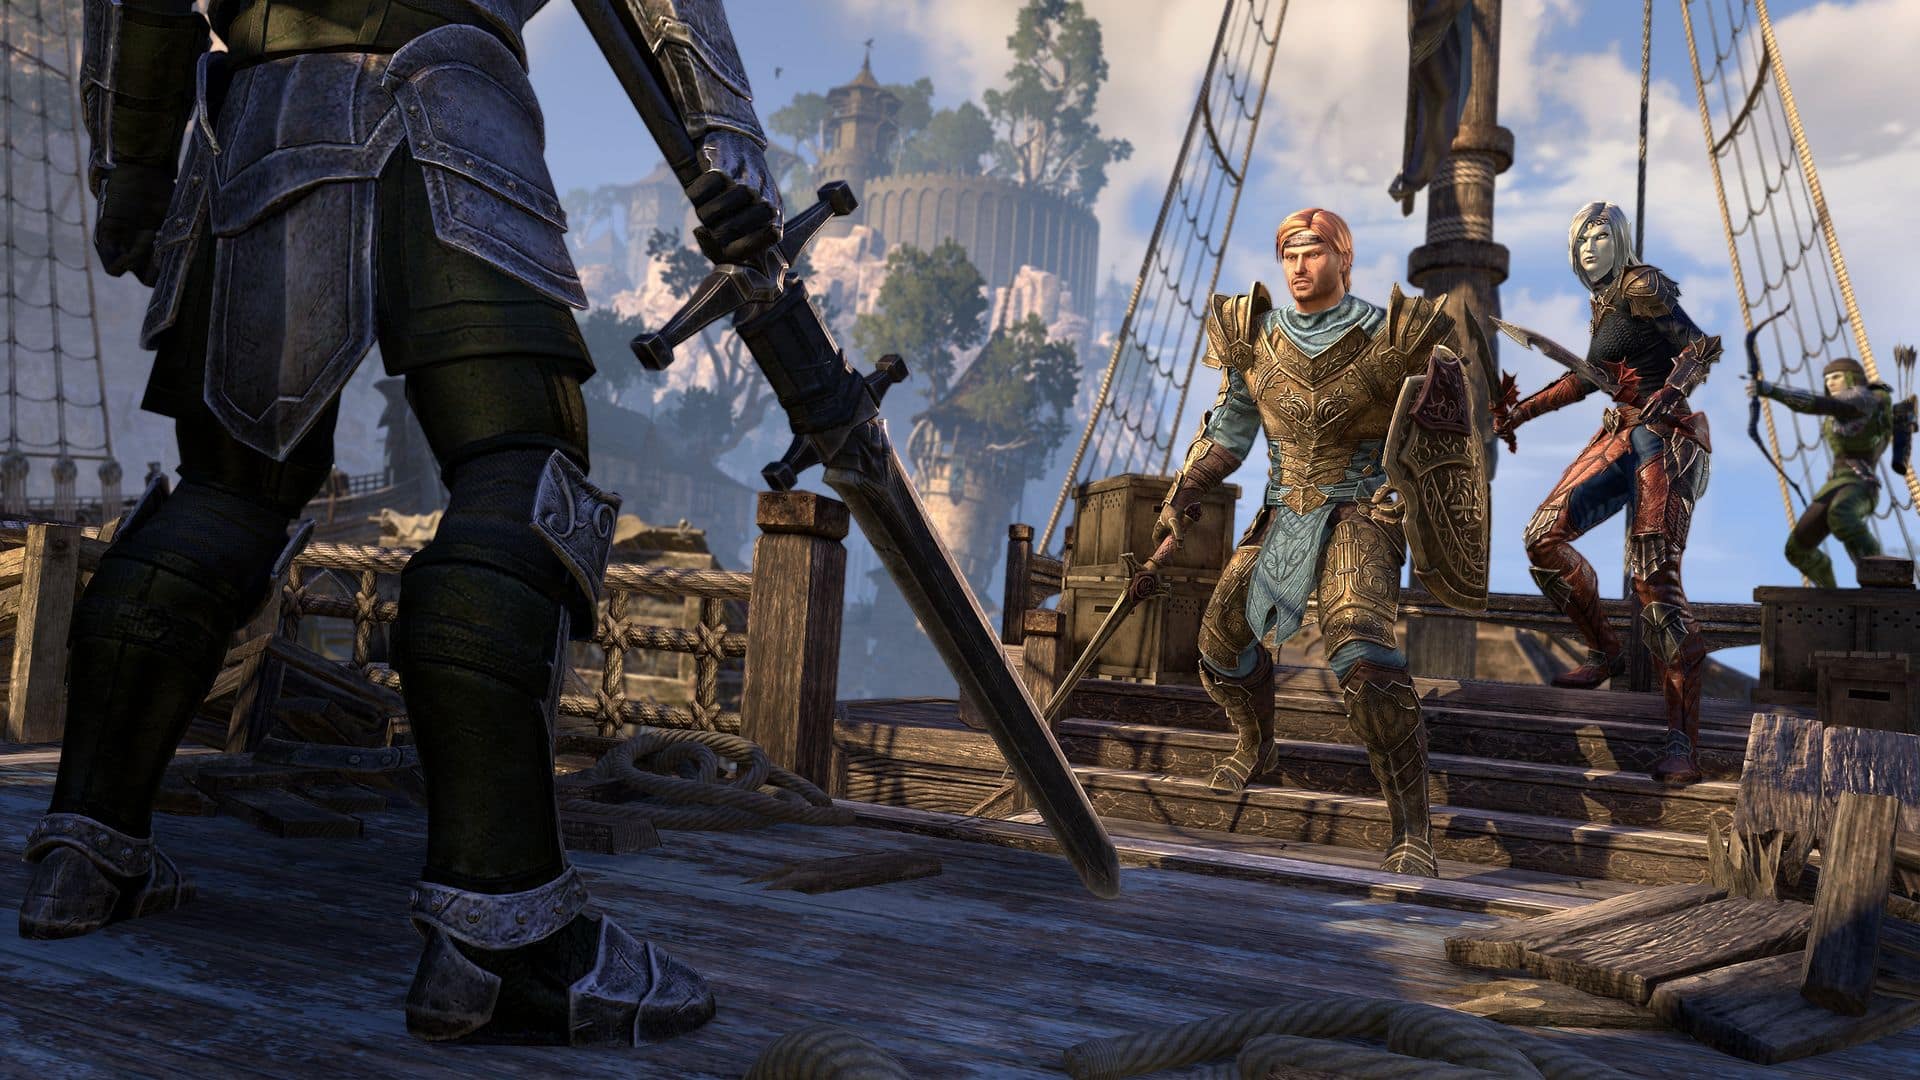 The Elder Scrolls Online Firesong DLC adds 15 hours of story content